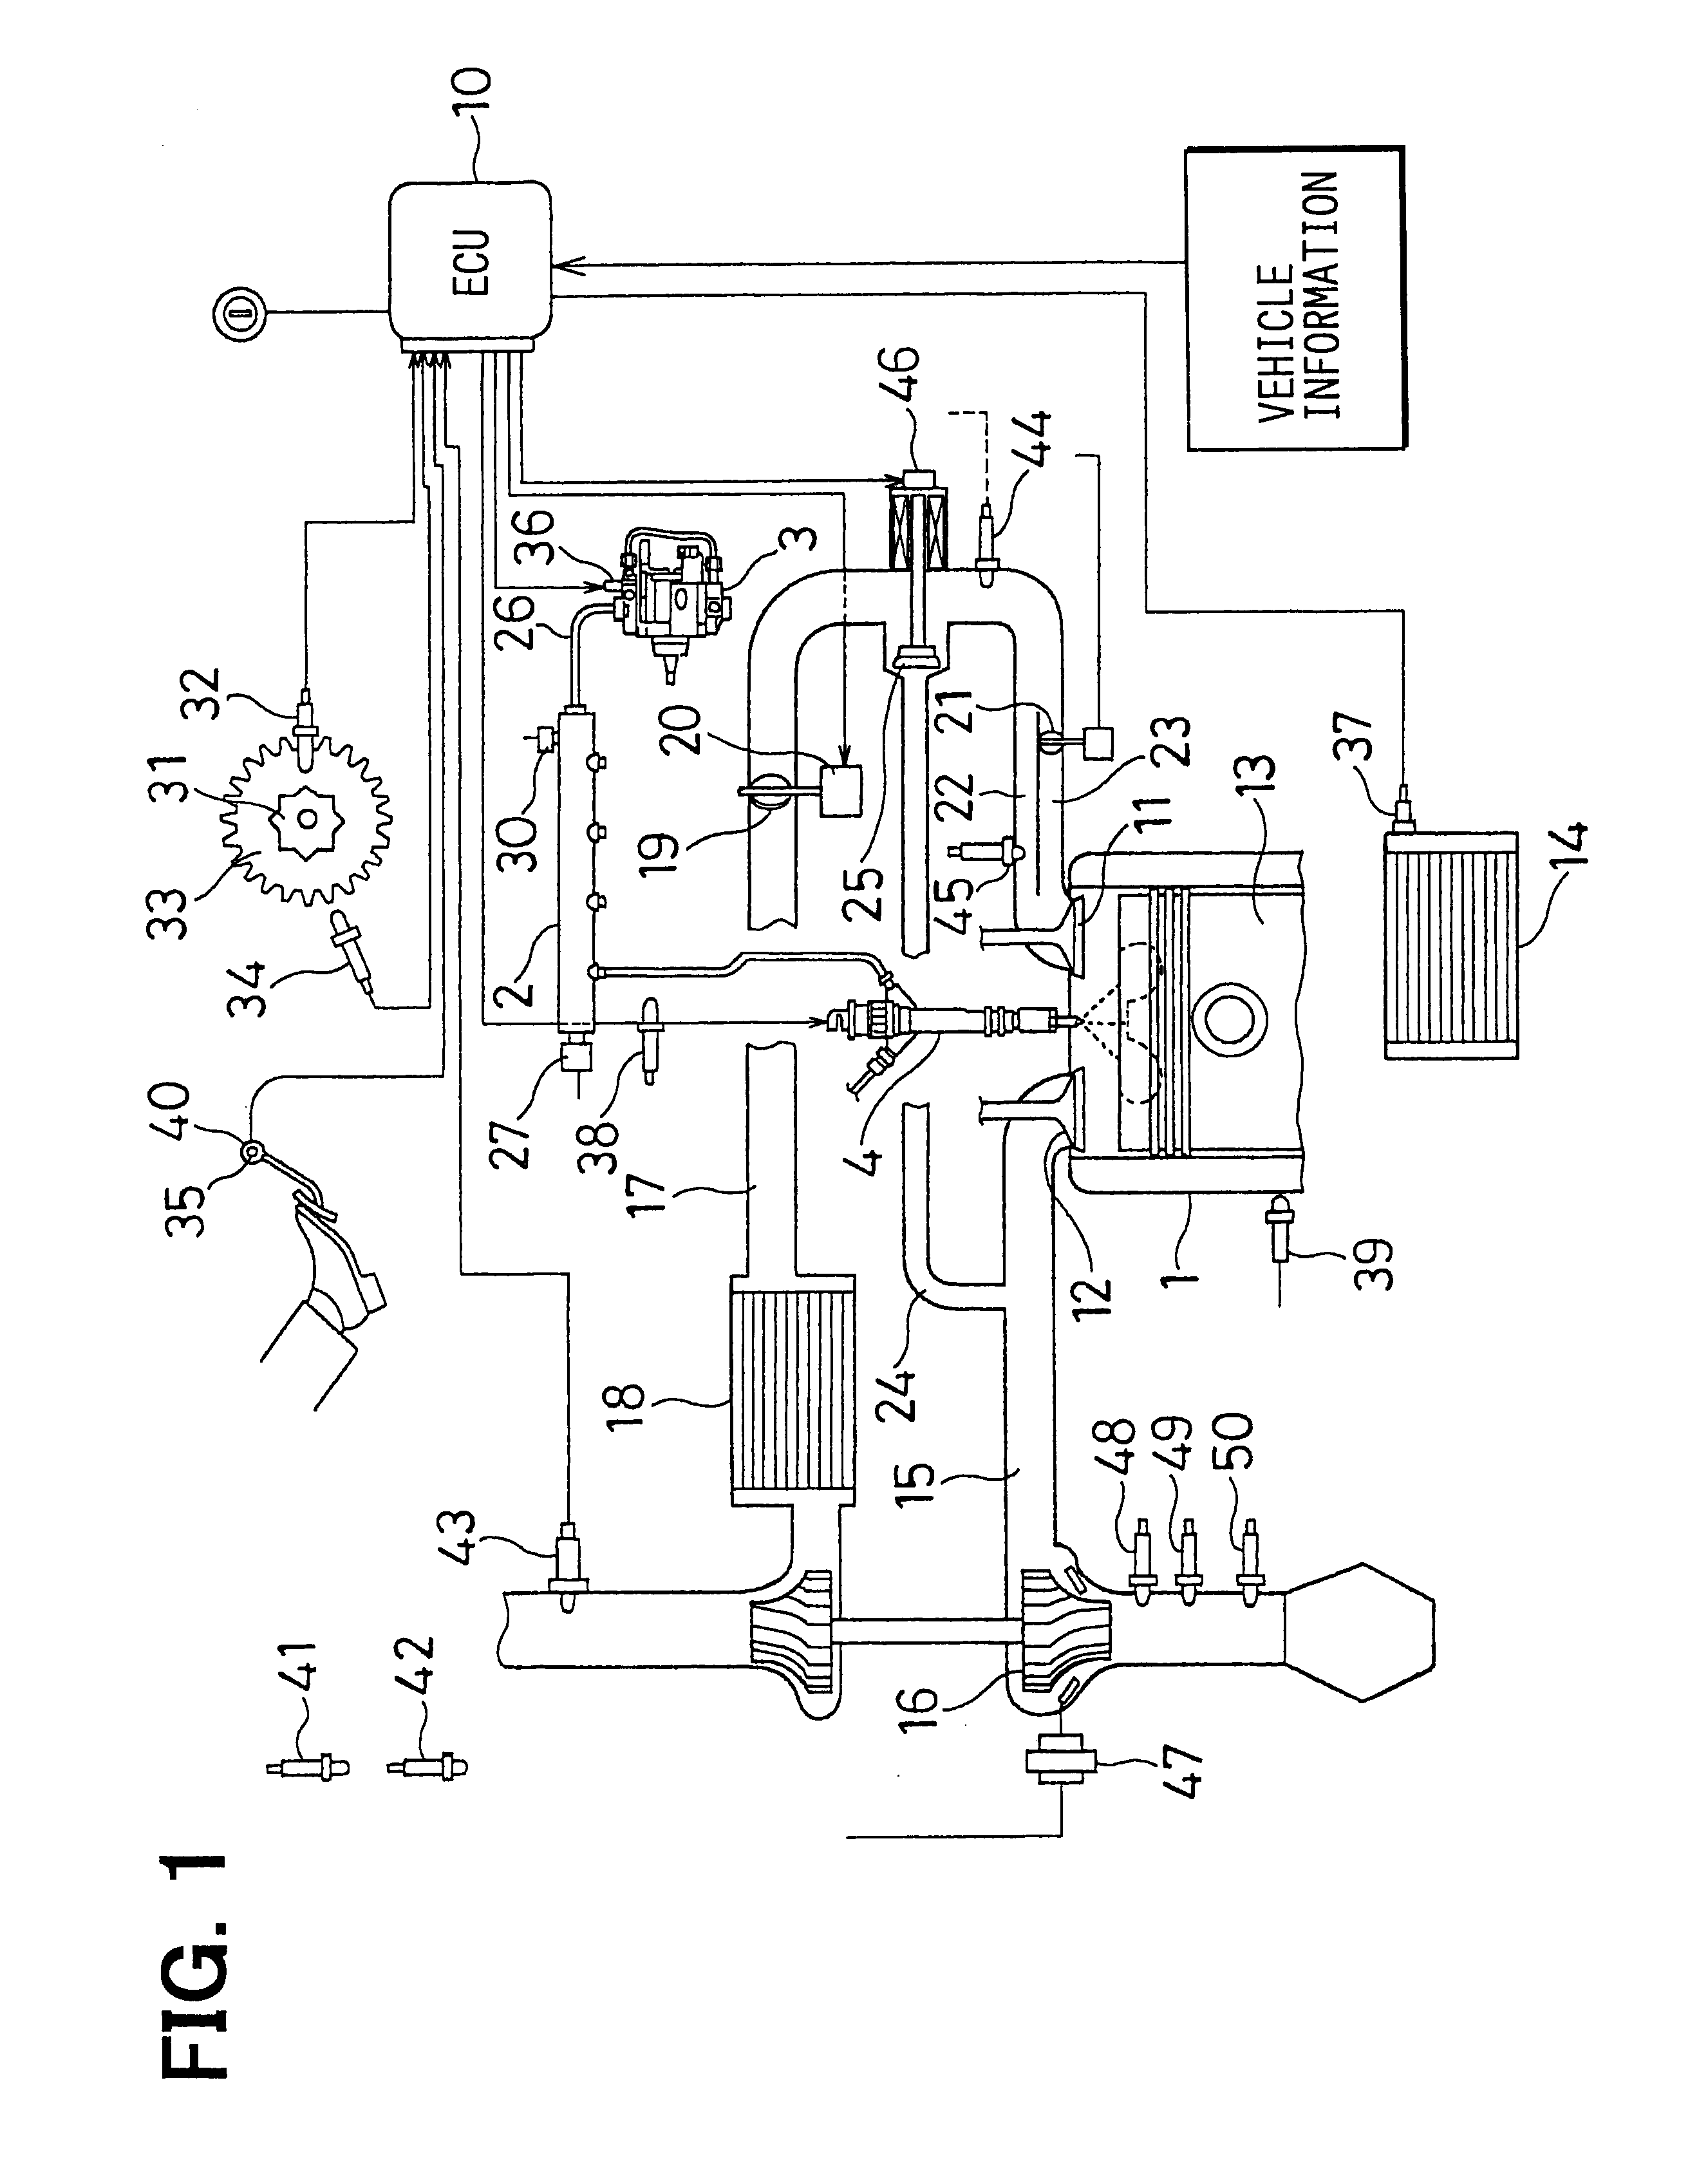 Fuel injection quantity control system for engine